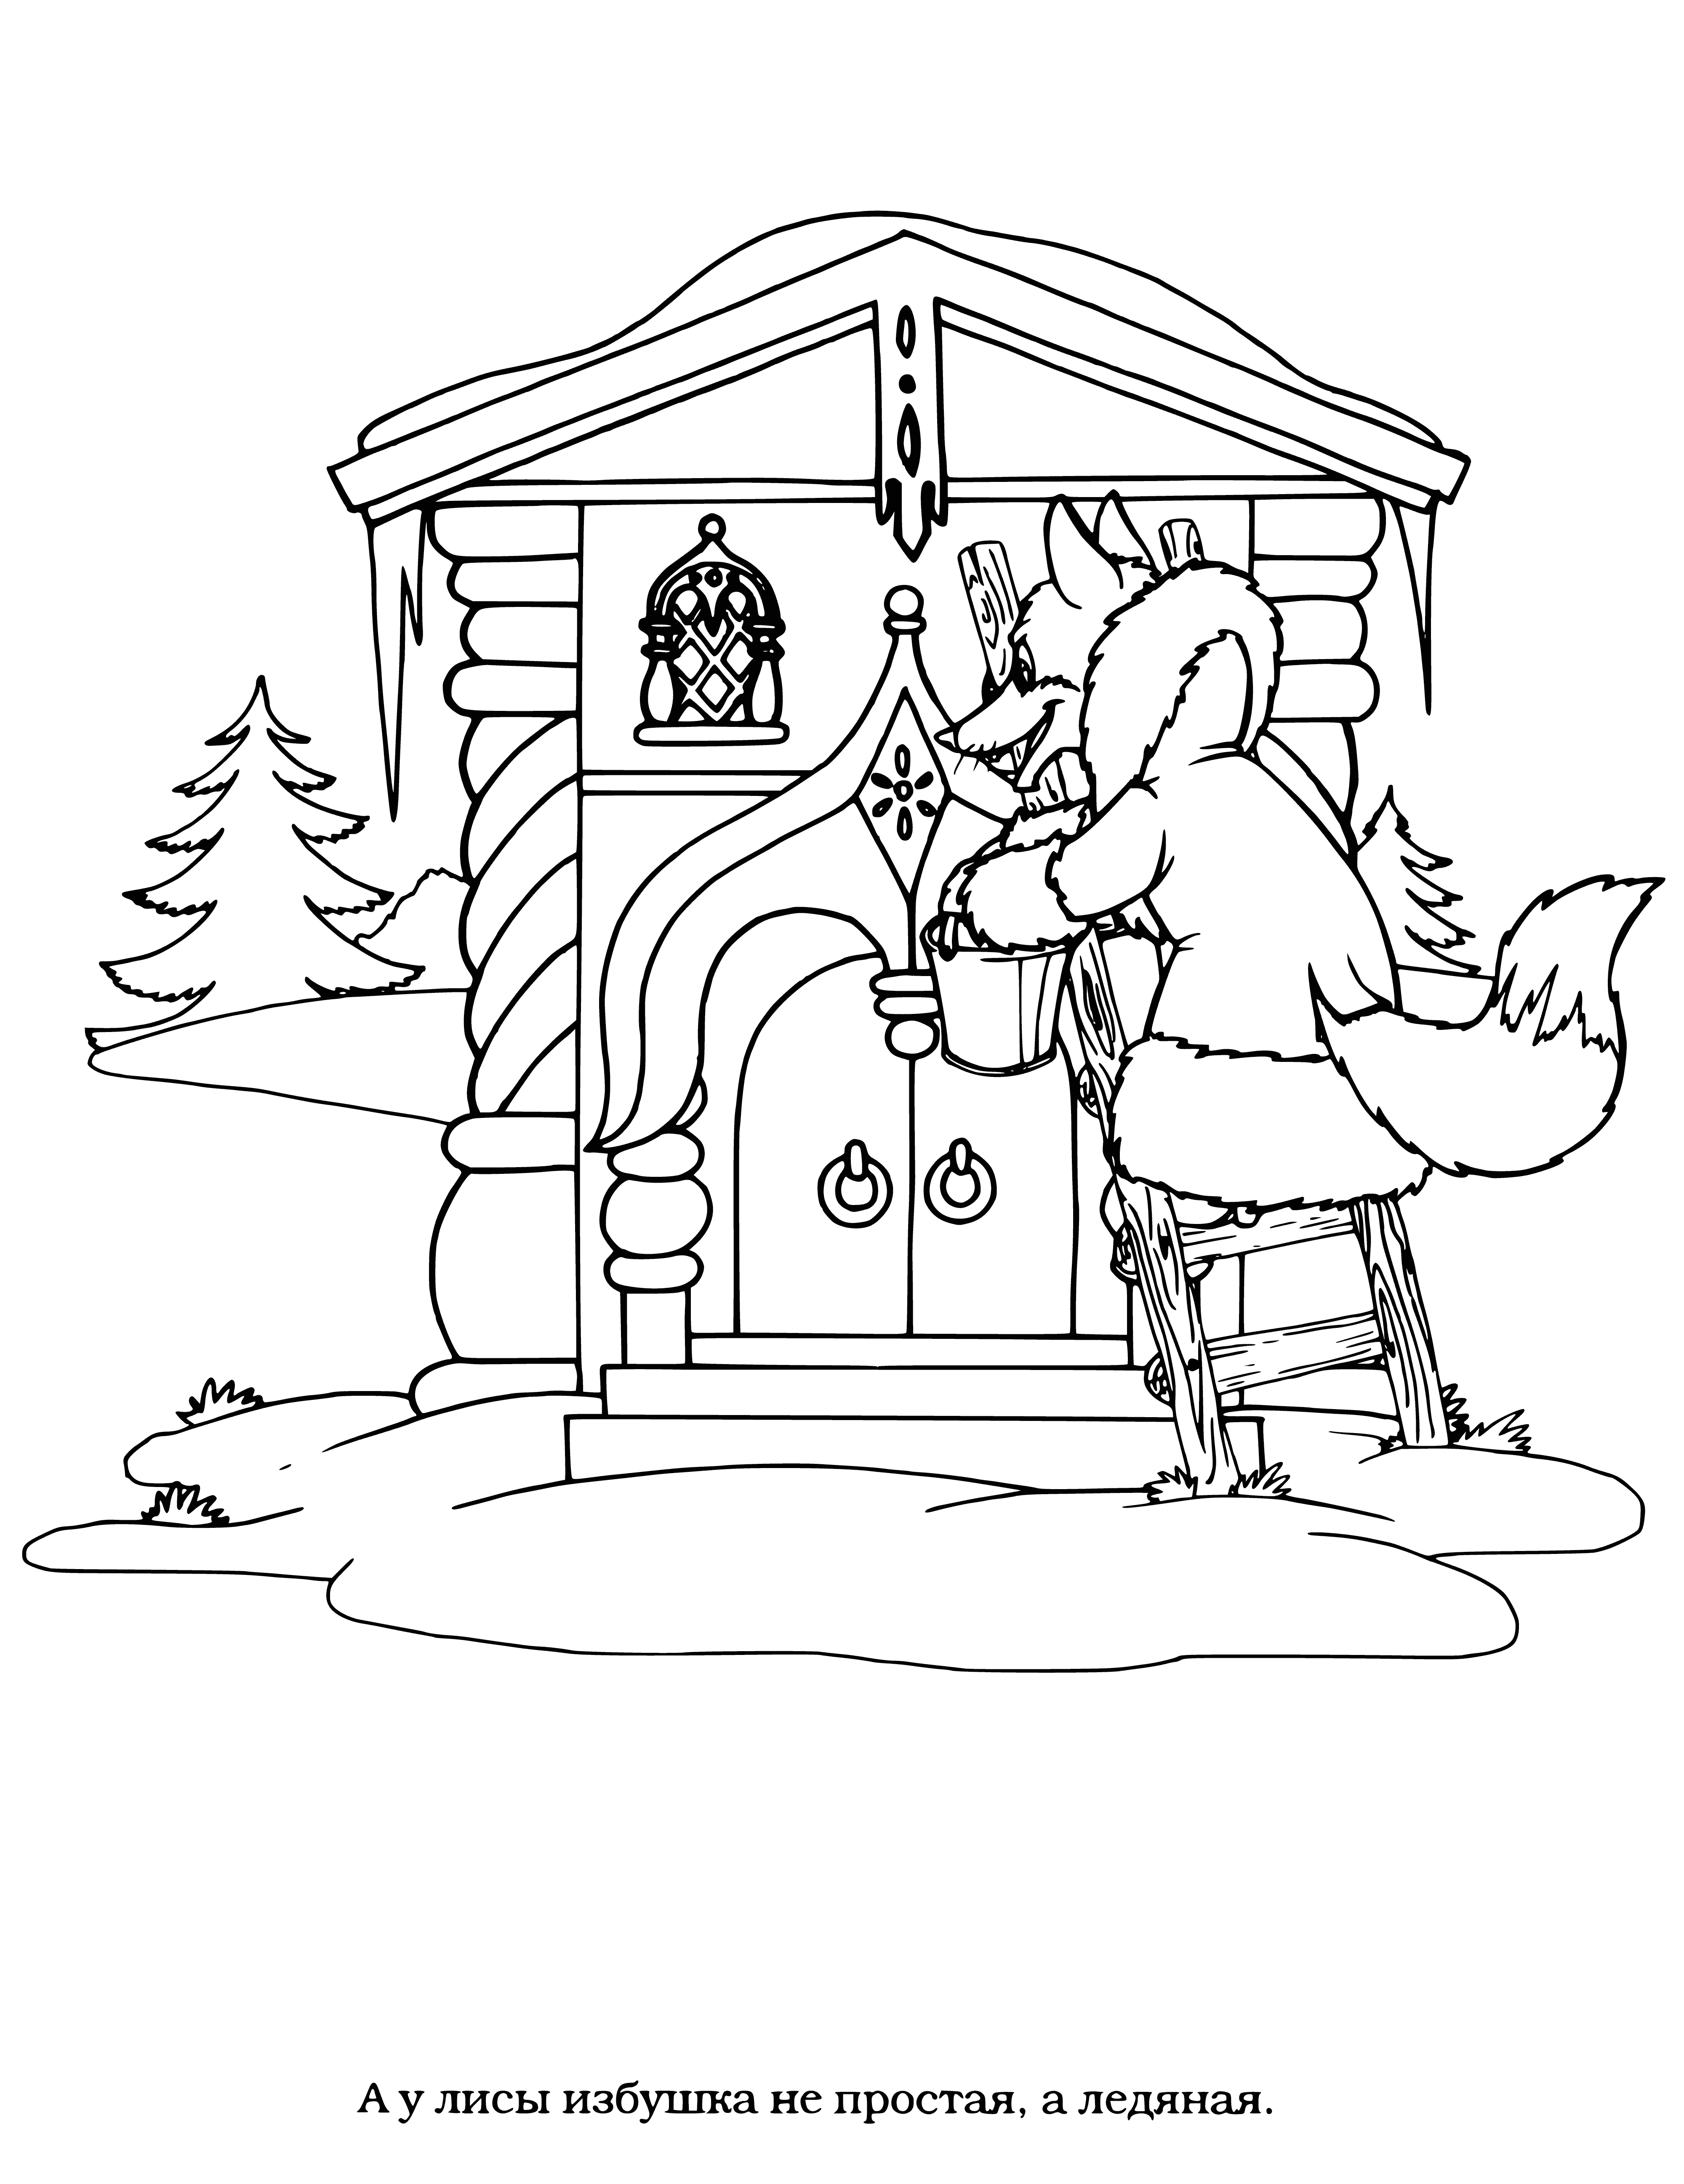 Ice hut coloring page